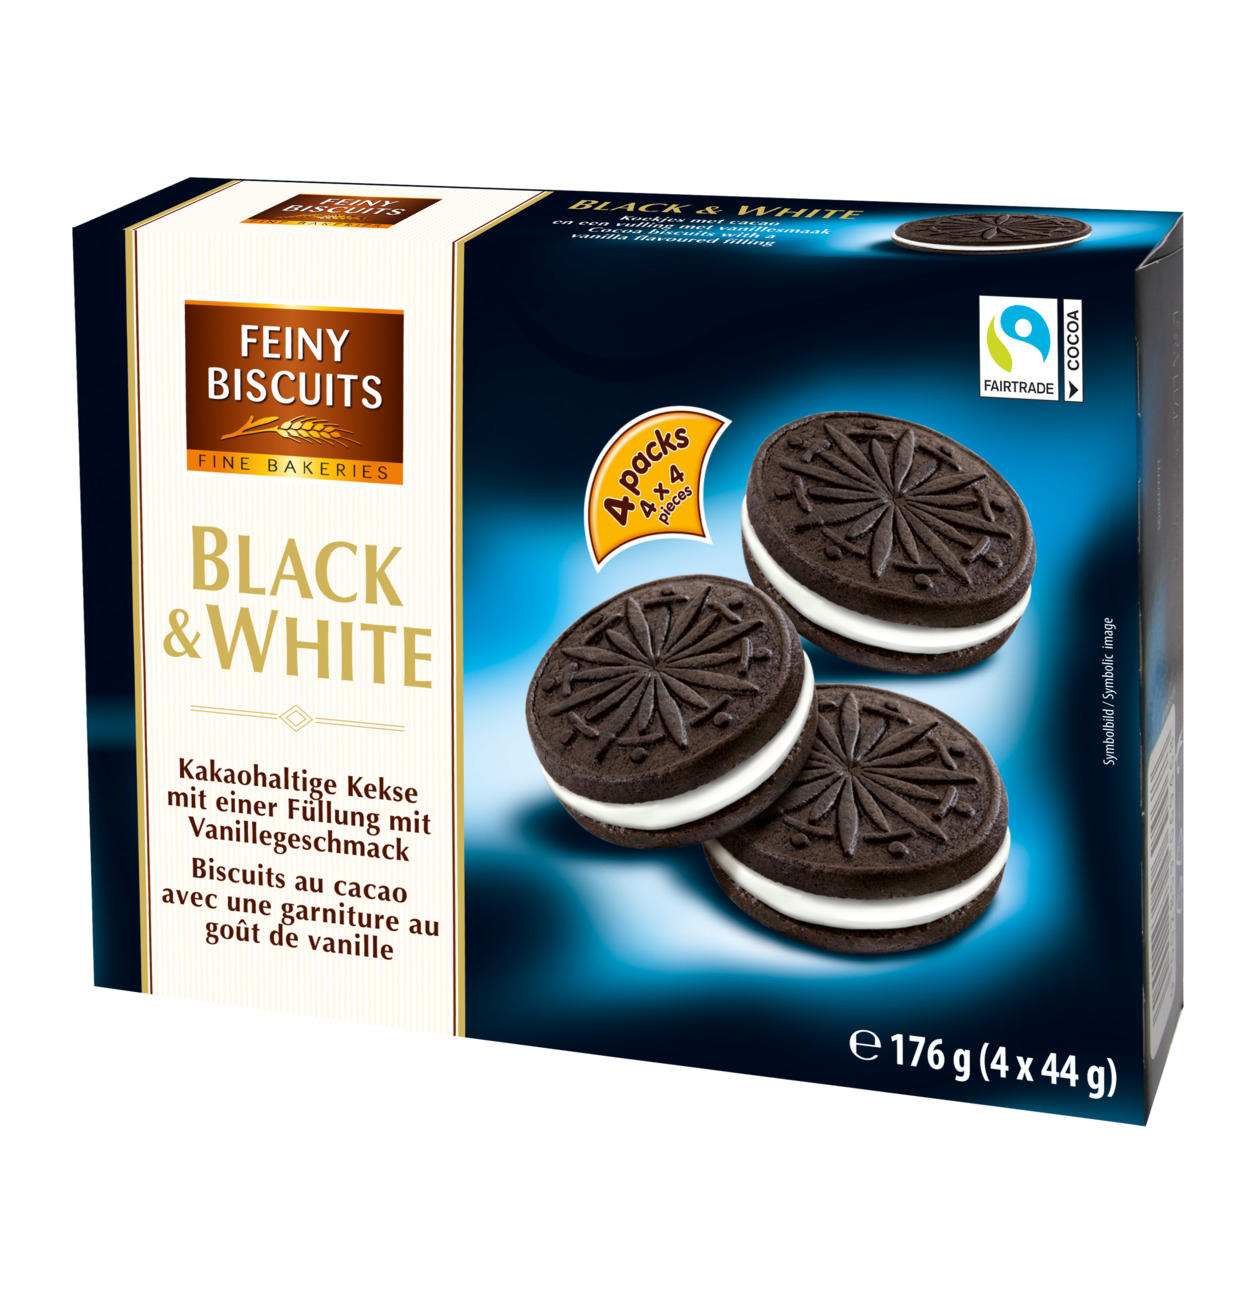 Feiny Biscuits - Black & White 4-pack